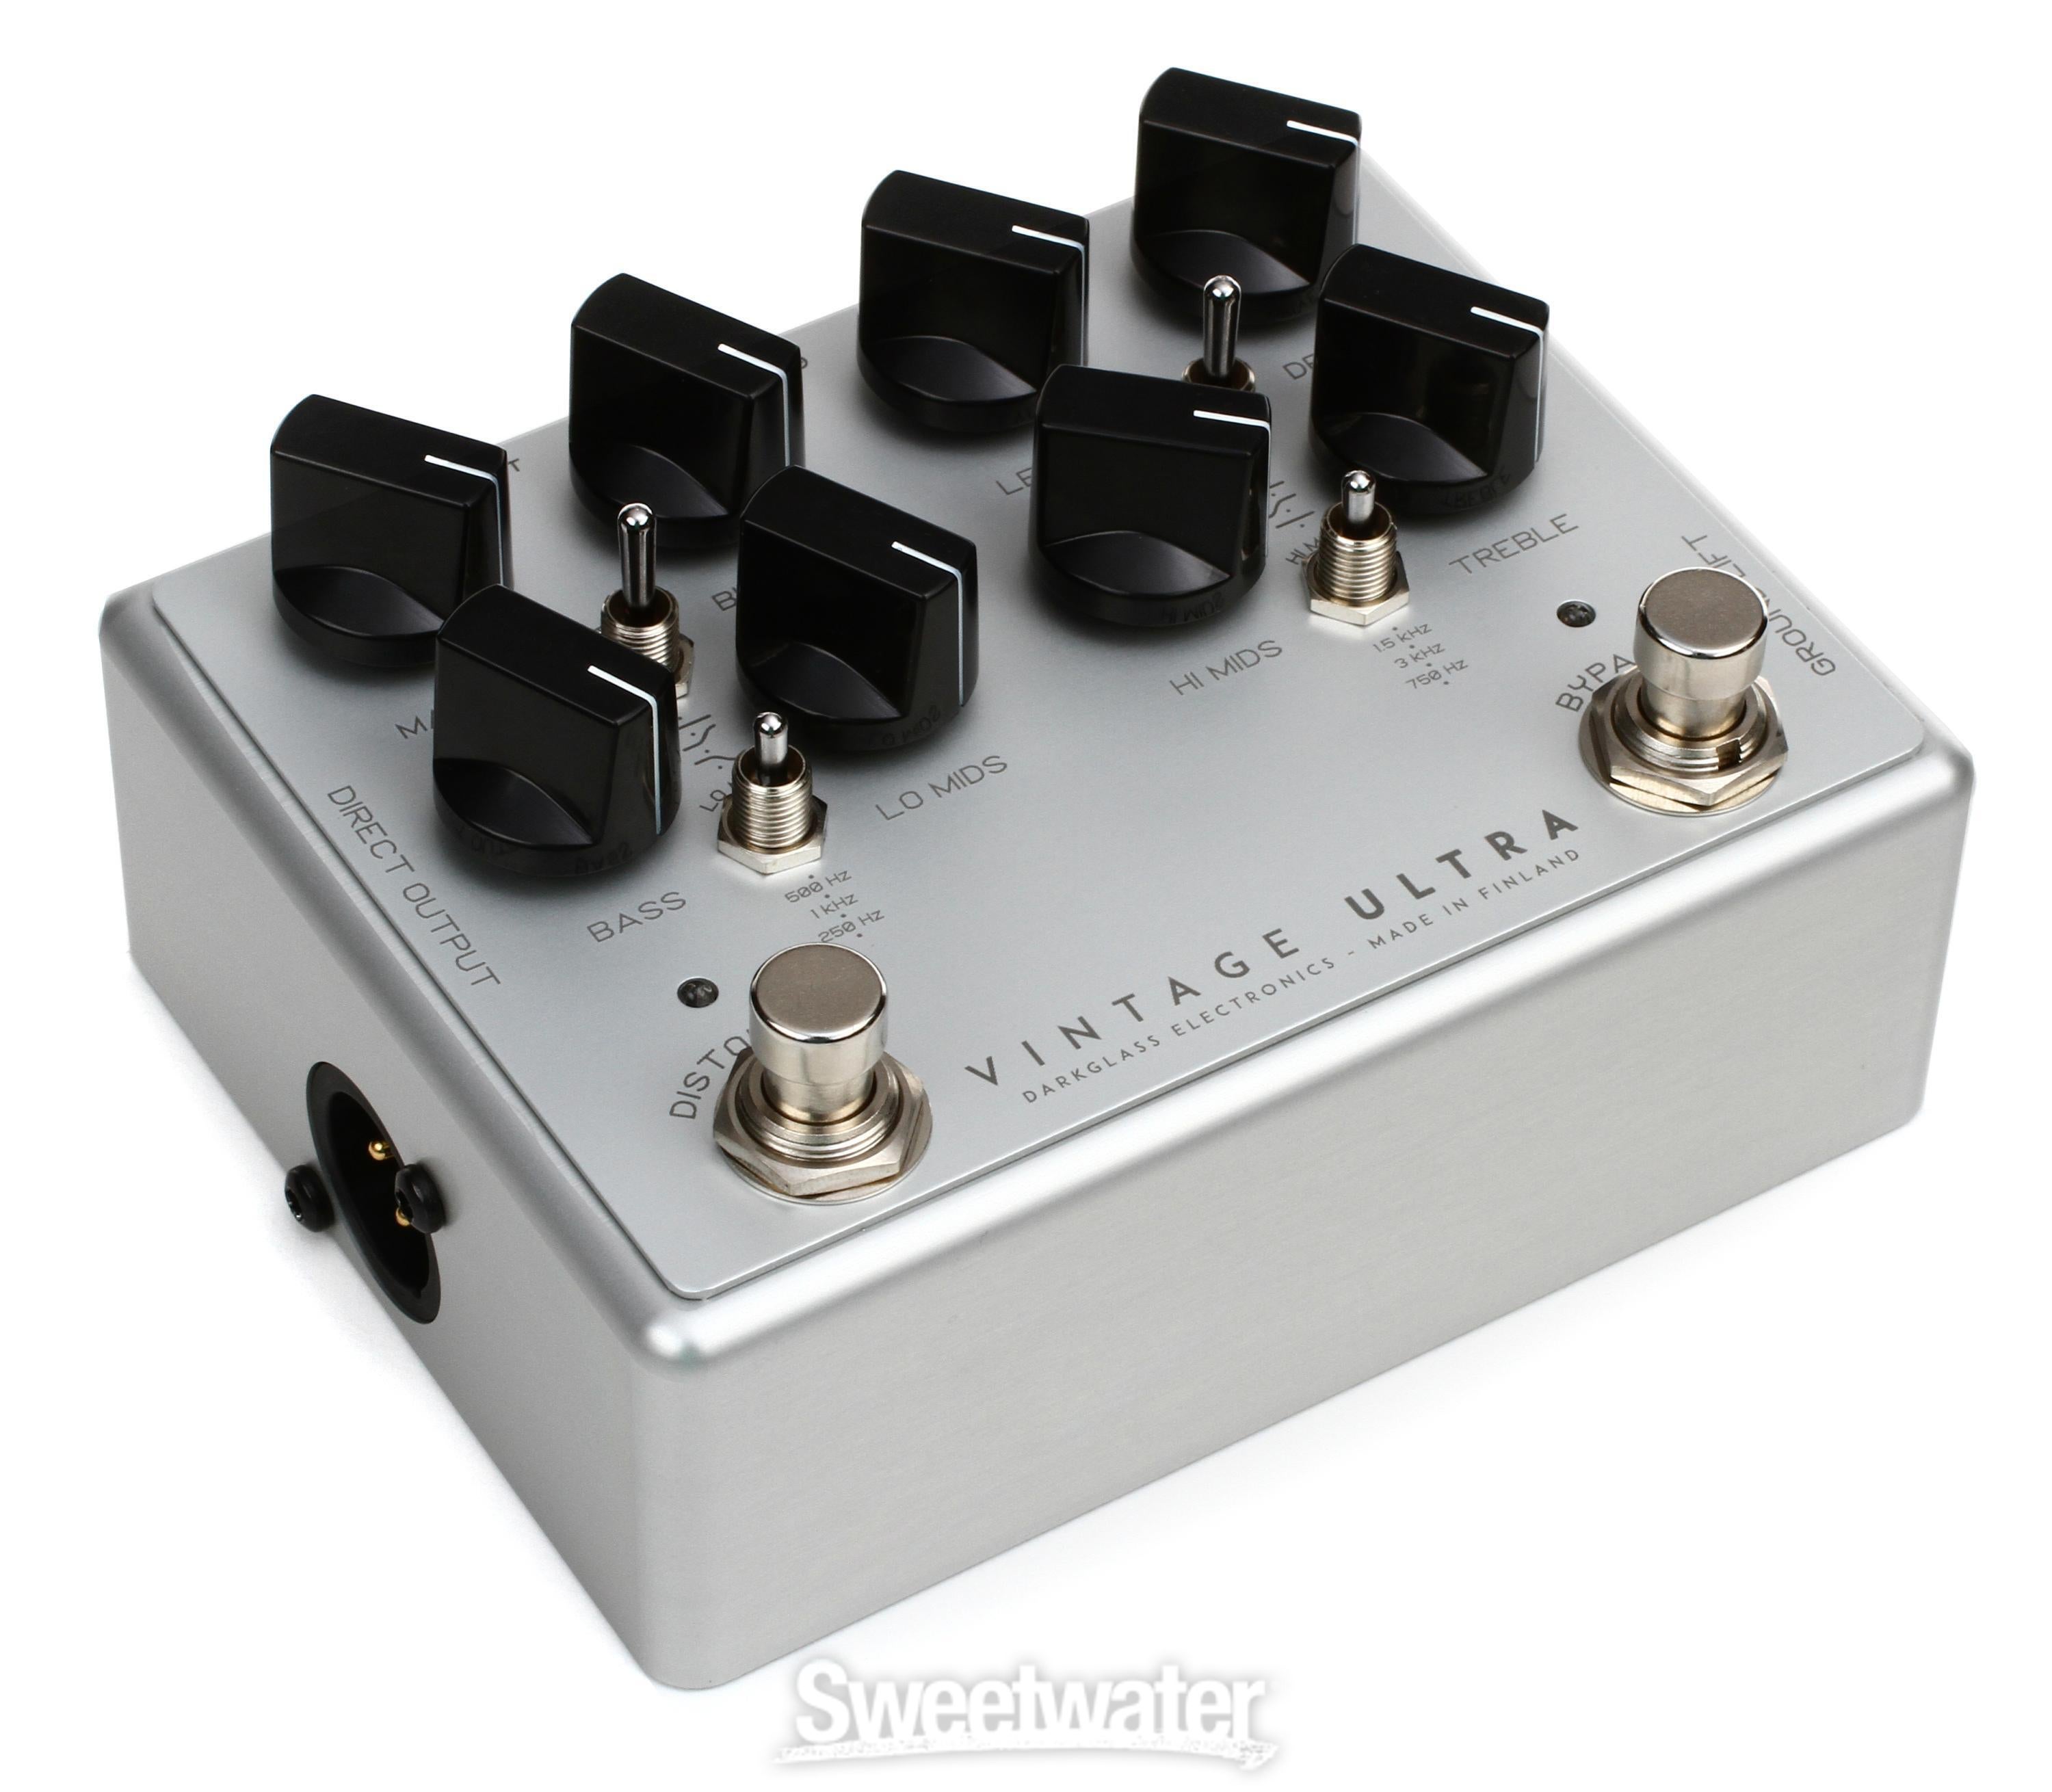 Darkglass Vintage Ultra Bass Preamp Pedal | Sweetwater